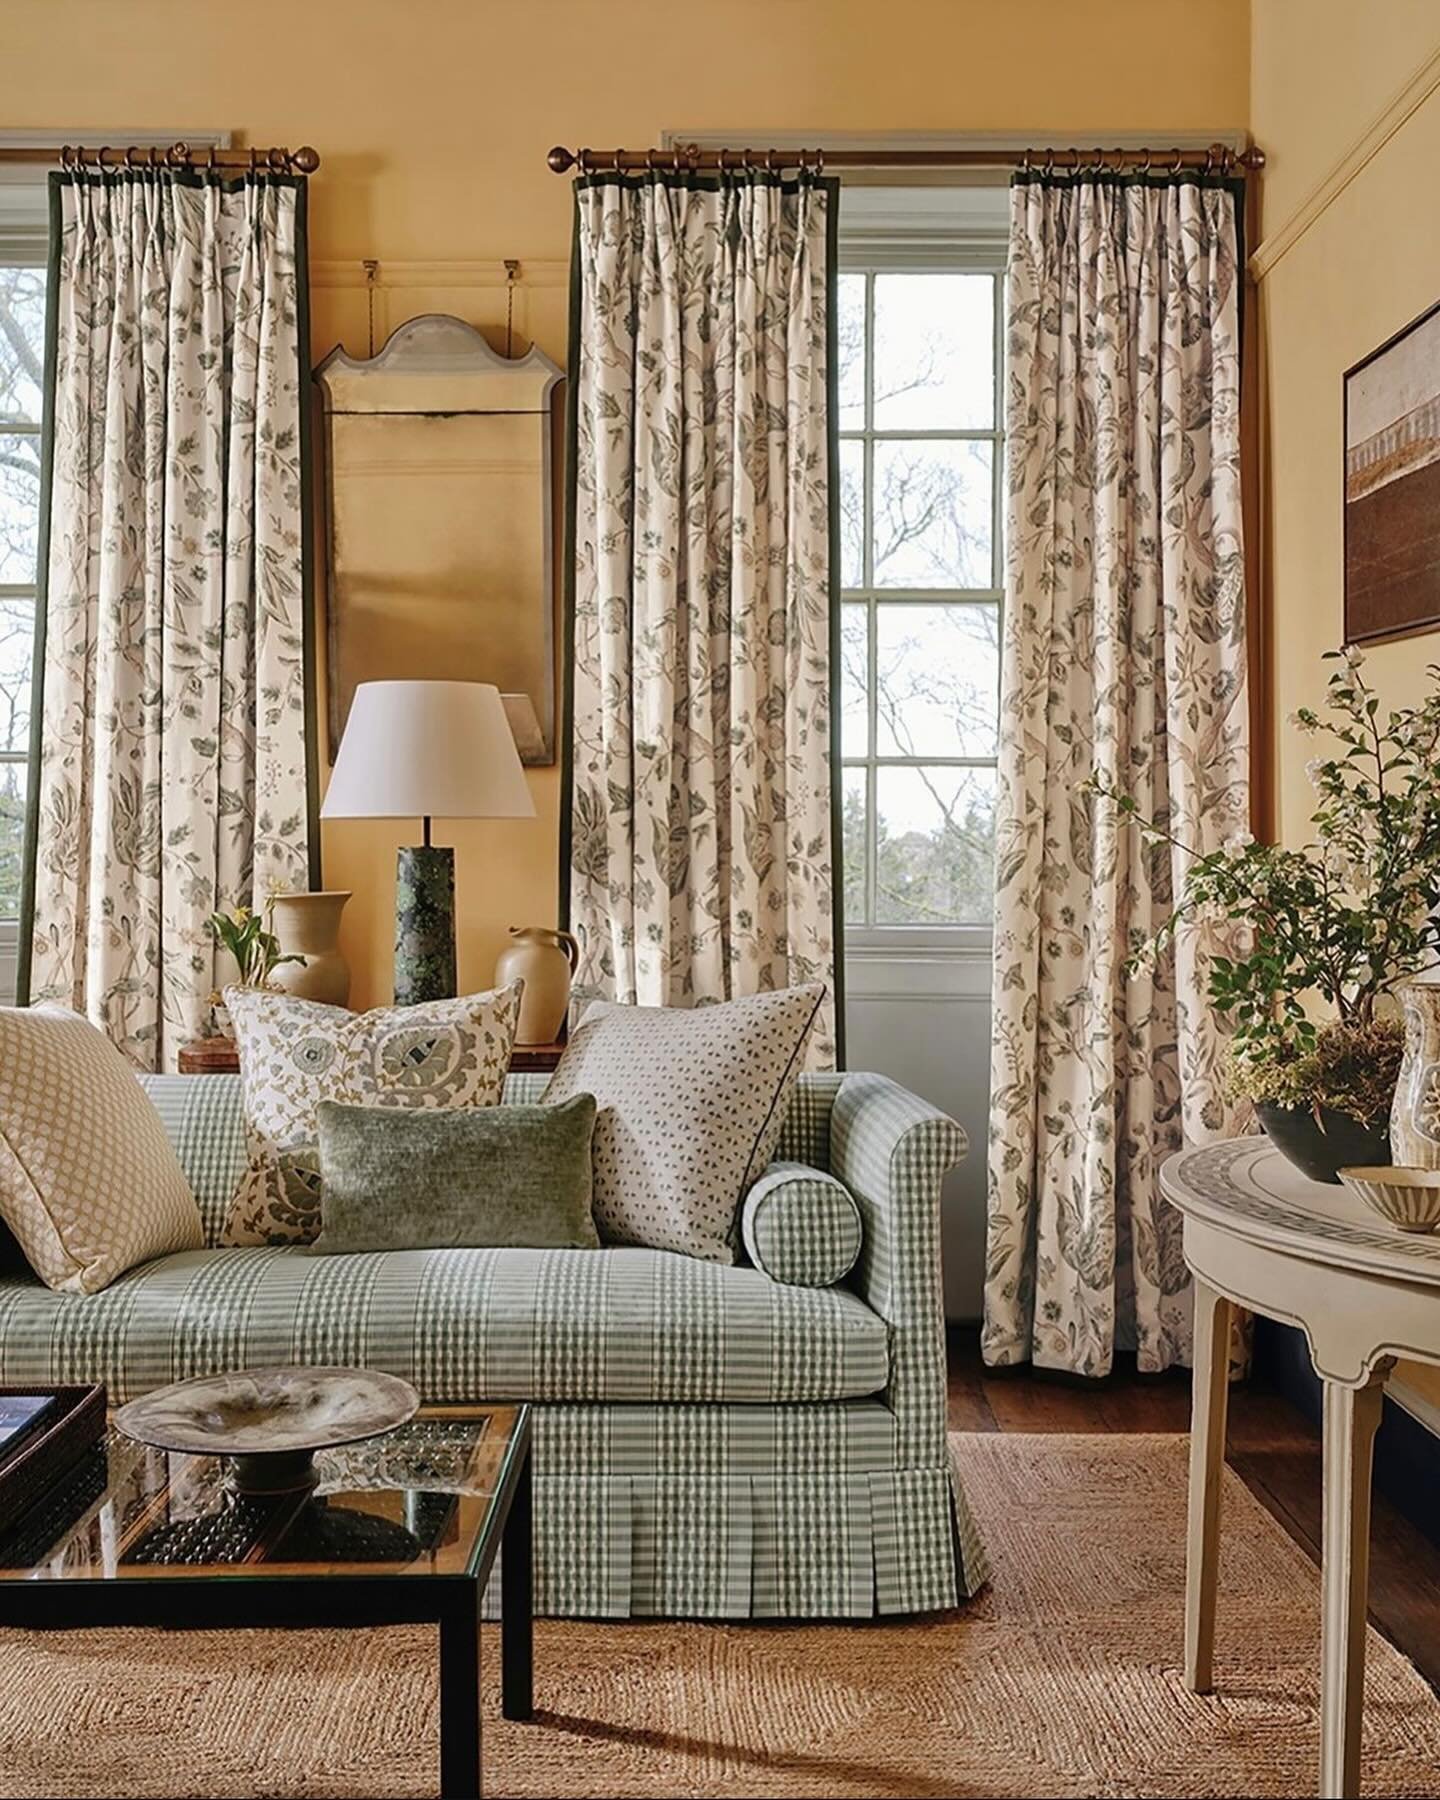 🌱Spring has sprung @colefaxandfowler 🌱with a beautiful collection of fabrics and what an elegant  room to showcase our Robertson rug!

The good news is the Robertson rugs are back in stock on Monday so pre-order them today and you will receive them